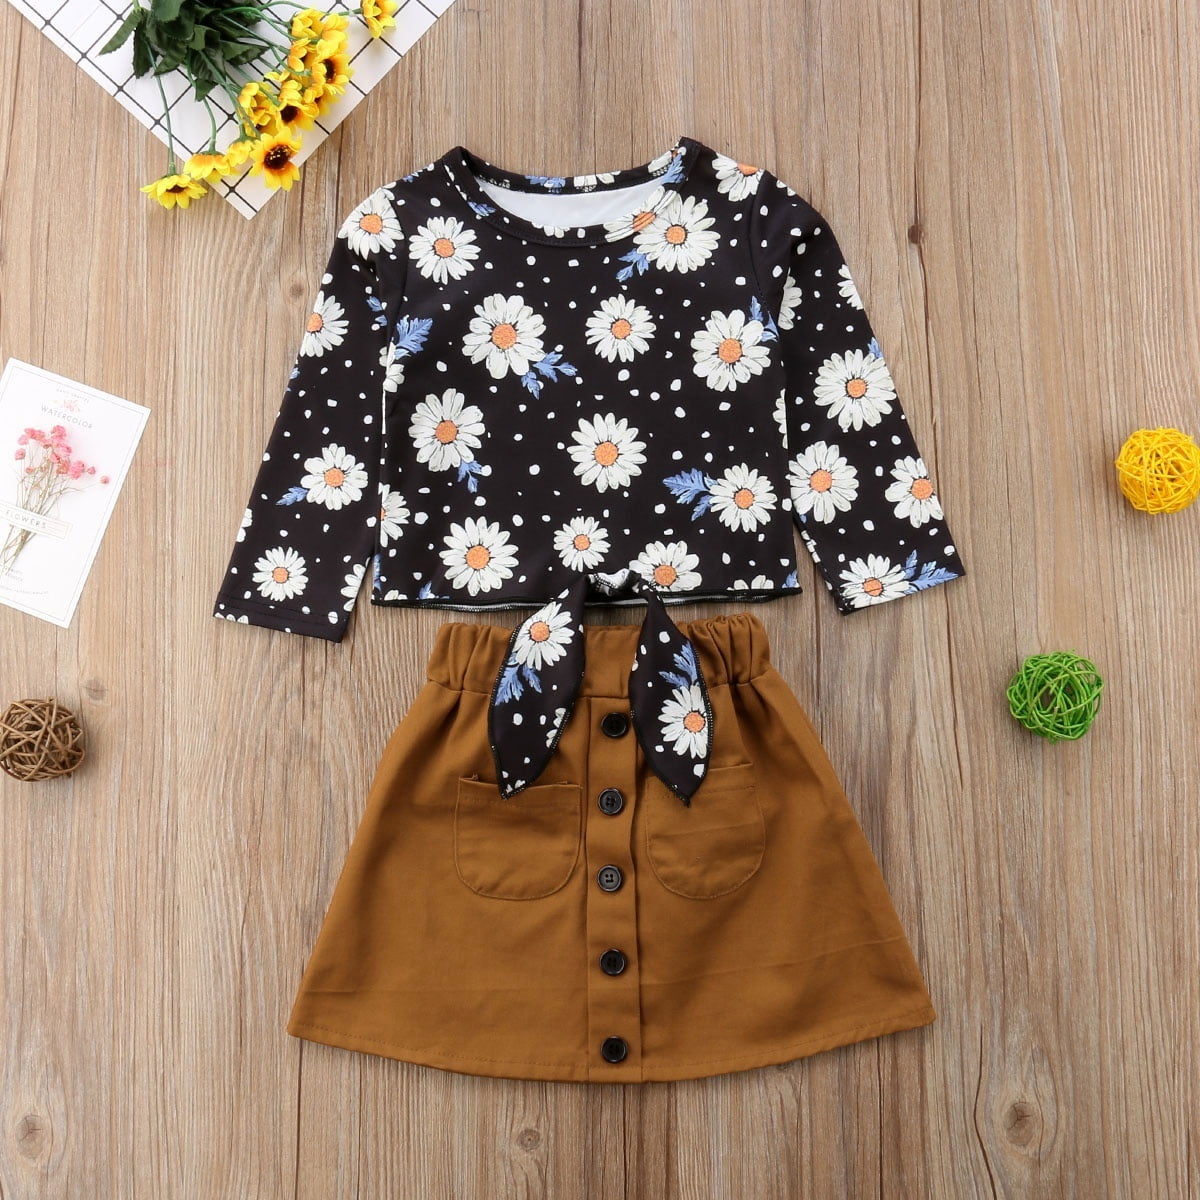 Toddler Kids Baby Girls Floral Tops T ...